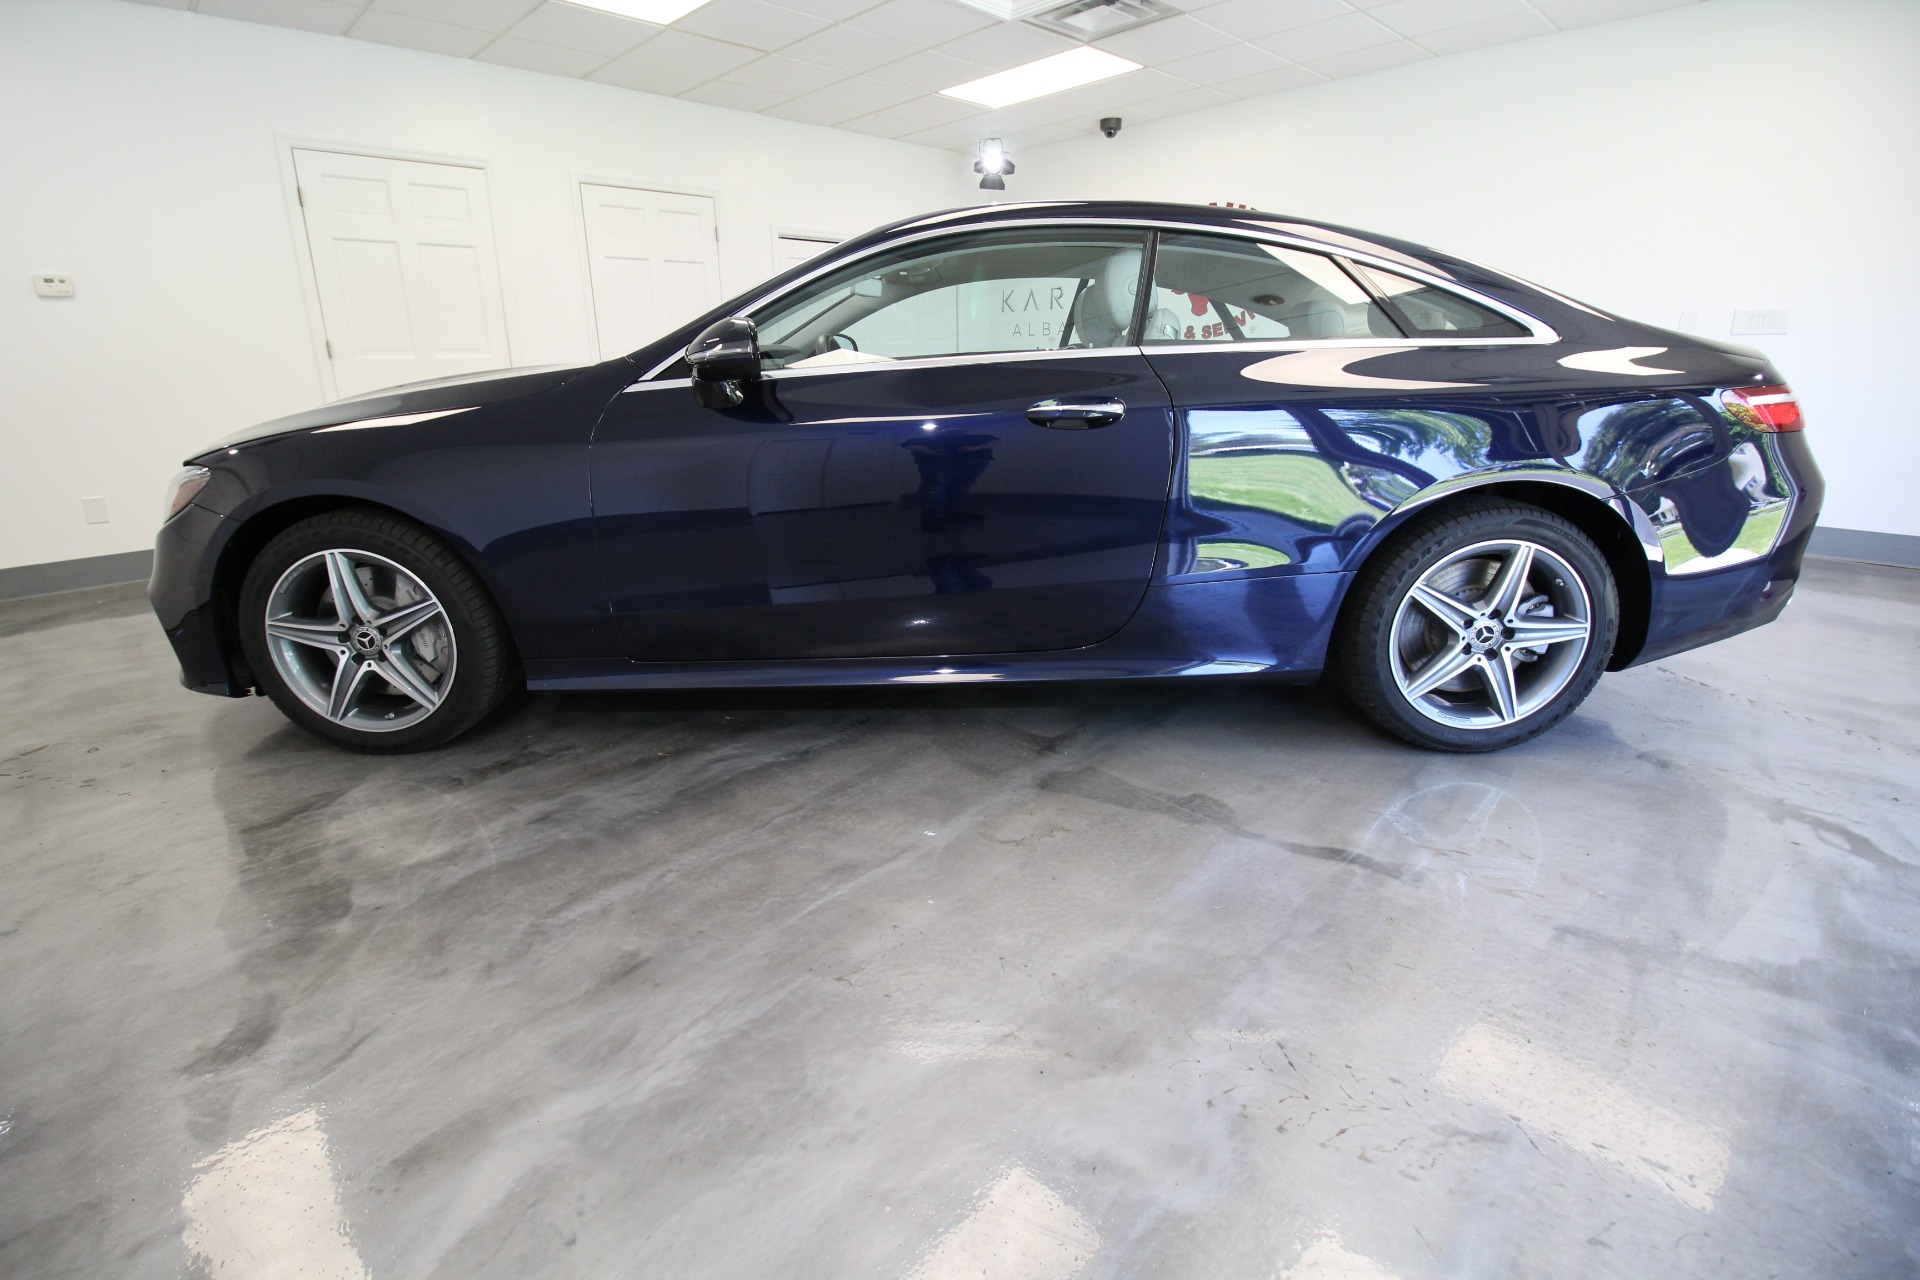 Used 2019 Lunar Blue Metallic Mercedes-Benz E-Class E450 Coupe 4MATIC AWD RARE COLORS HARD TO FIND | Albany, NY